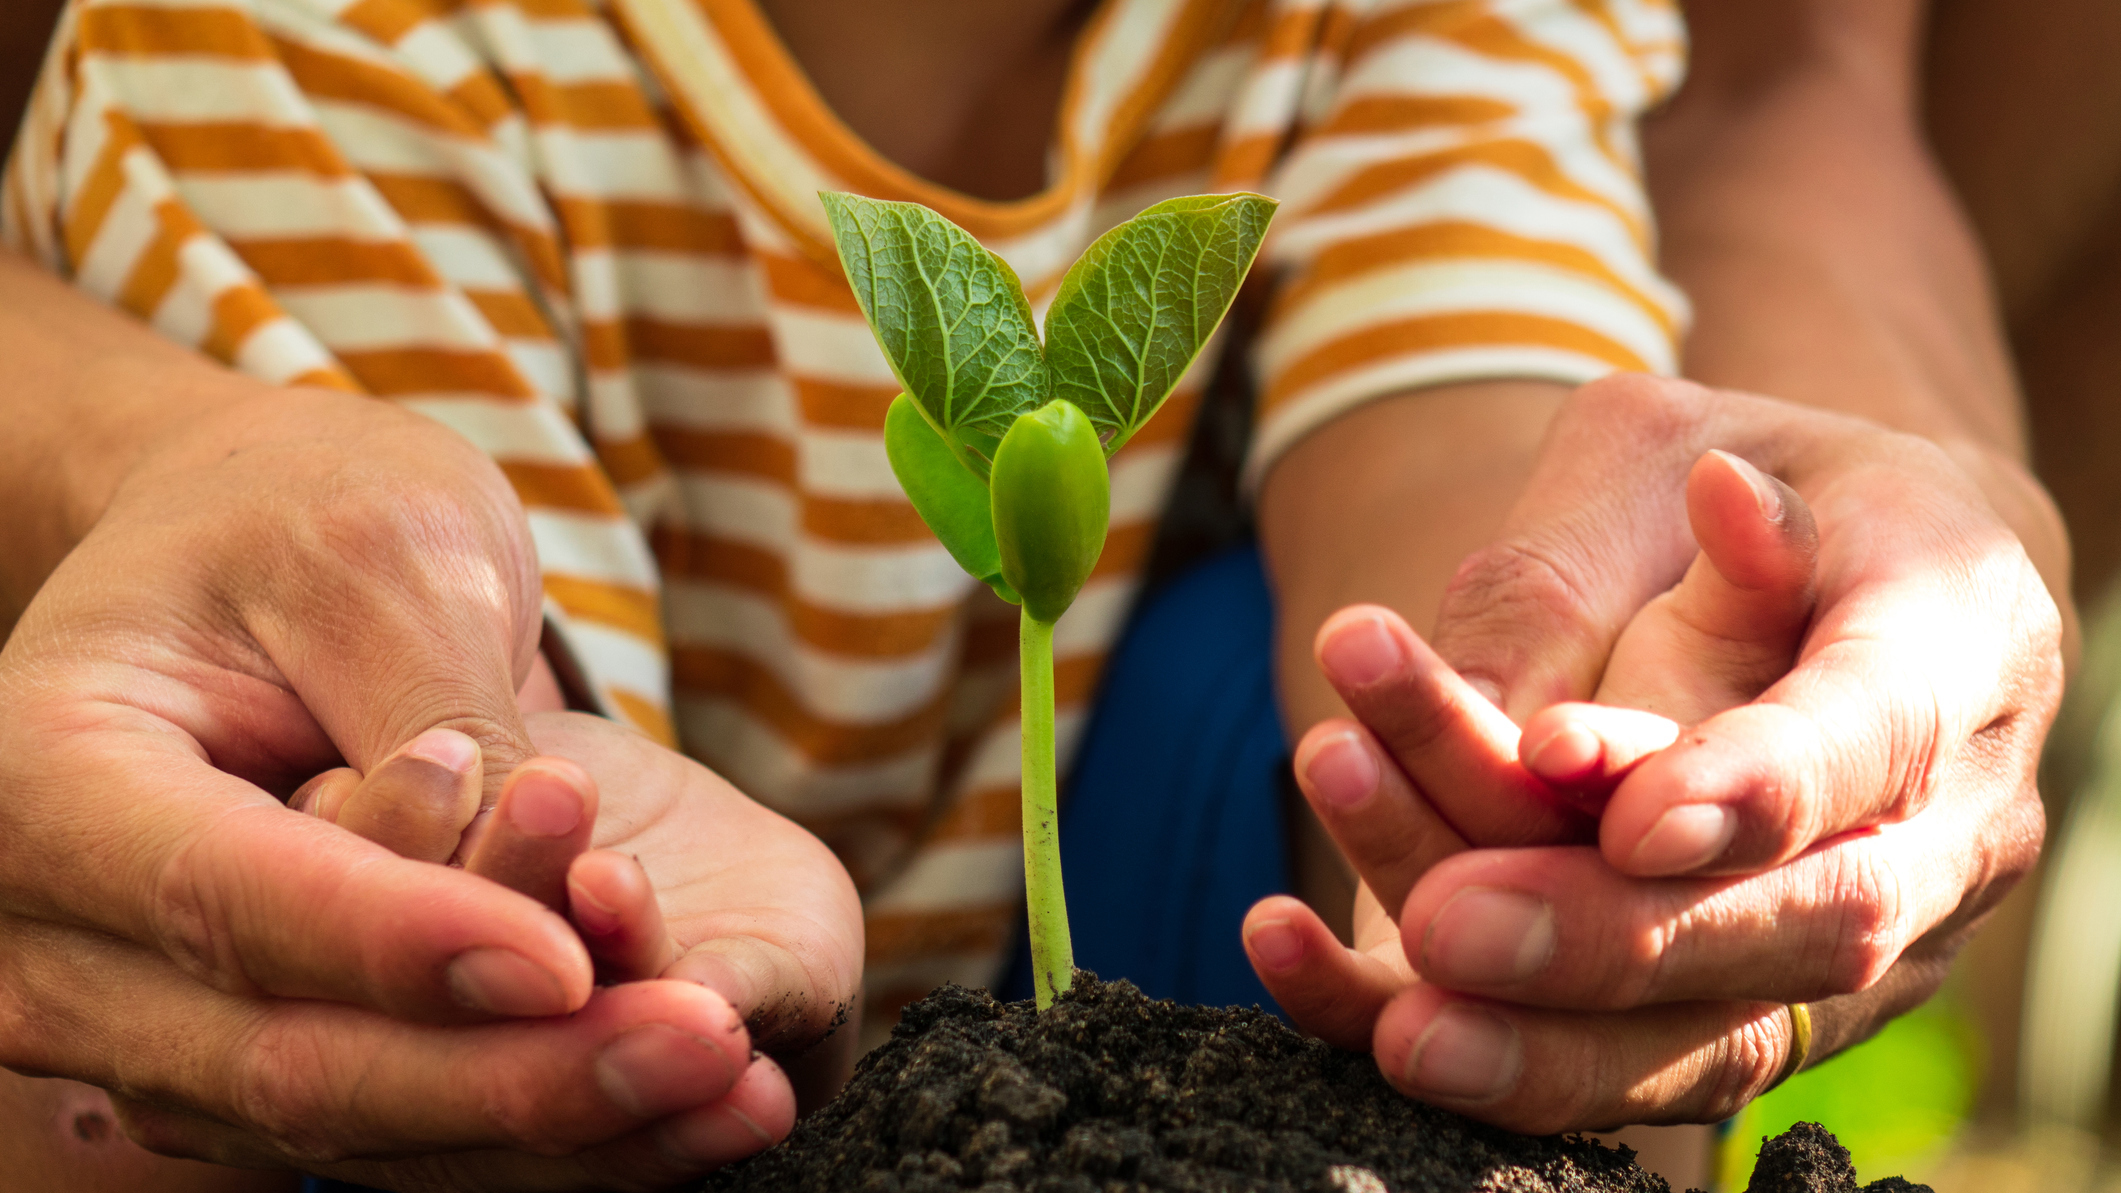 A parent and child's hands around a plant seedling that has sprouted from a mound of soil